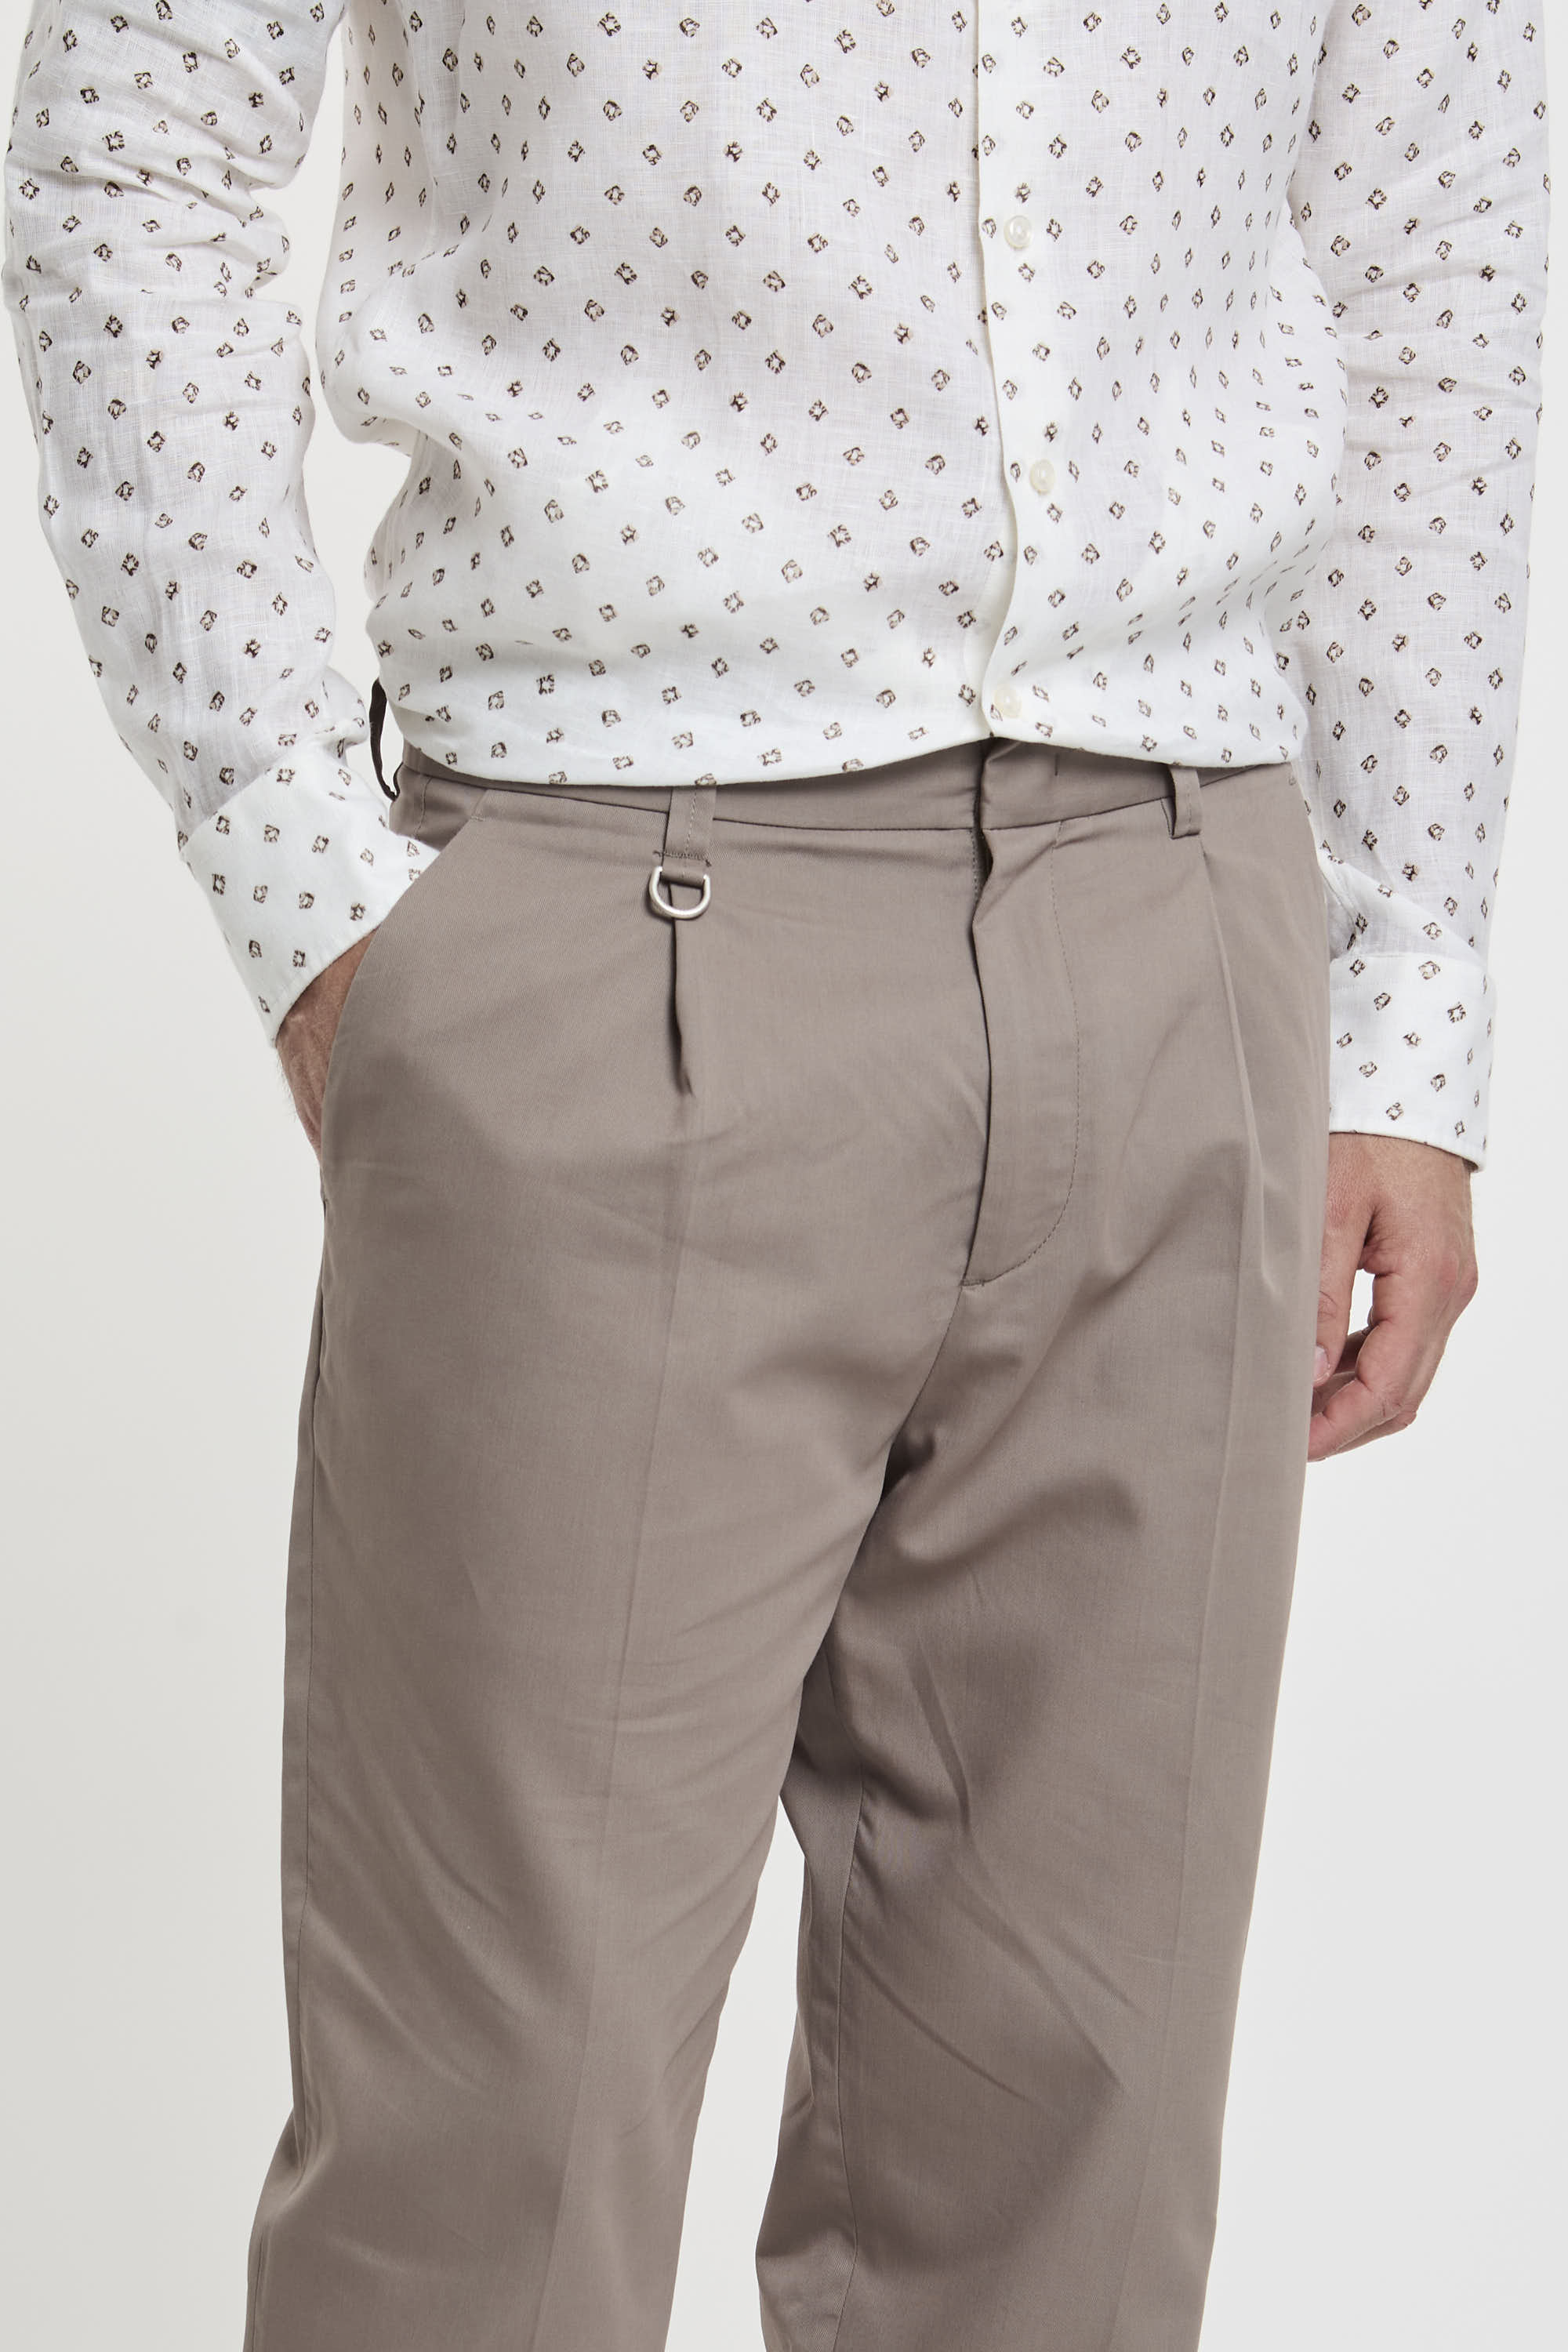 Paolo Pecora Cotton Blend Chino Trousers in Taupe-4